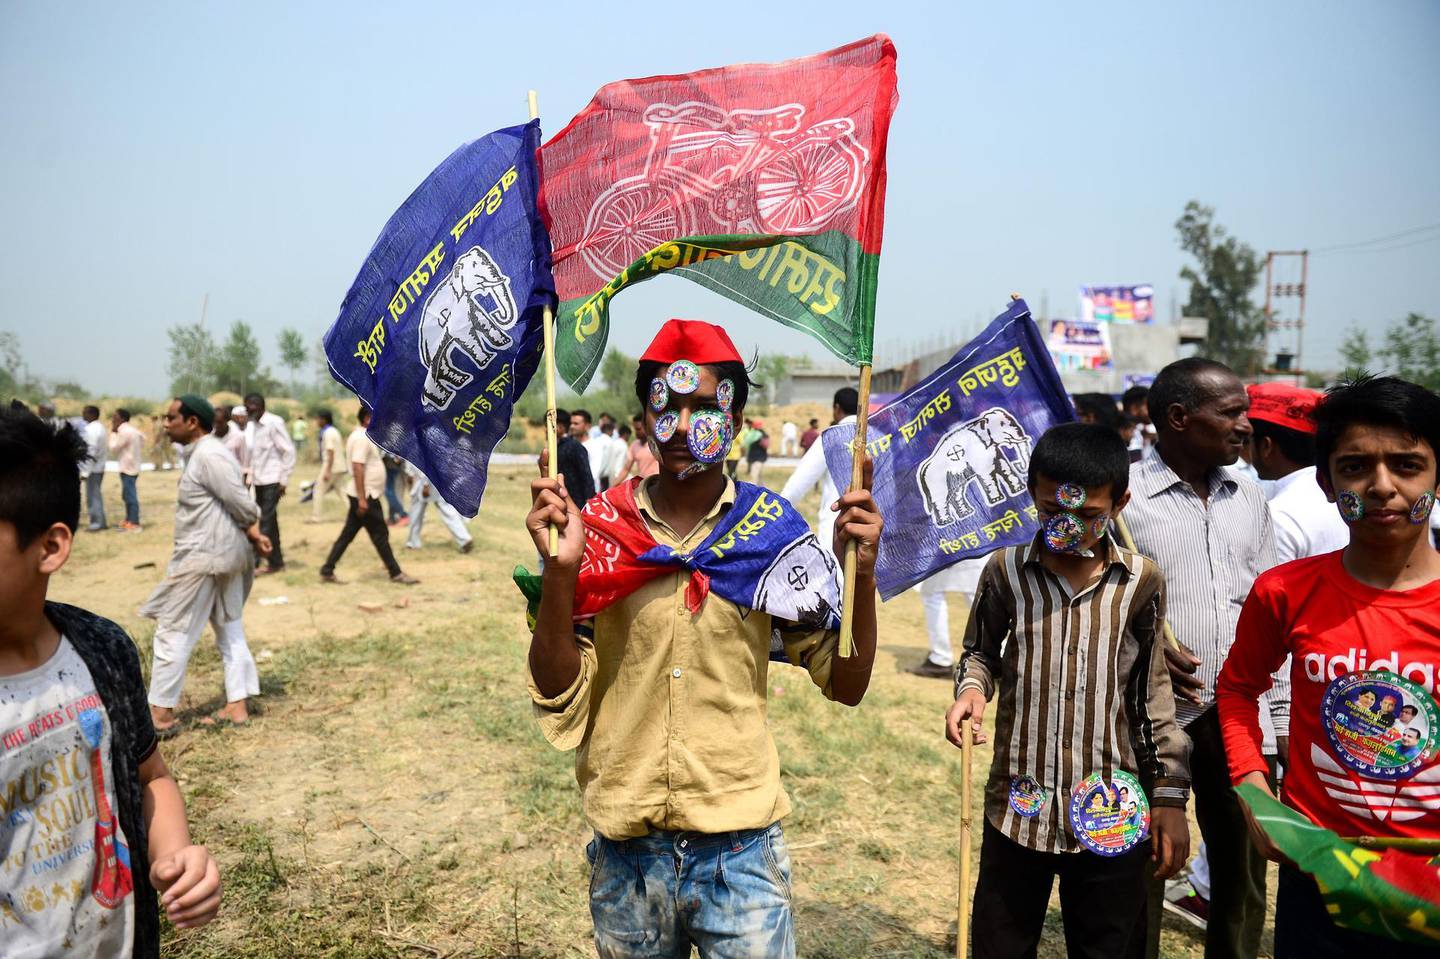 TOPSHOT - An Indian supporter of Bahujan Samaj Party (BSP), Samajwadi Party (SP) and Rashtriya Lok Dal (RLD) waves party flags at the SP-BSP-RLD alliance's first joint rally in Deoband in Uttar Pradesh state on April 7, 2019.  / AFP / SANJAY KANOJIA
